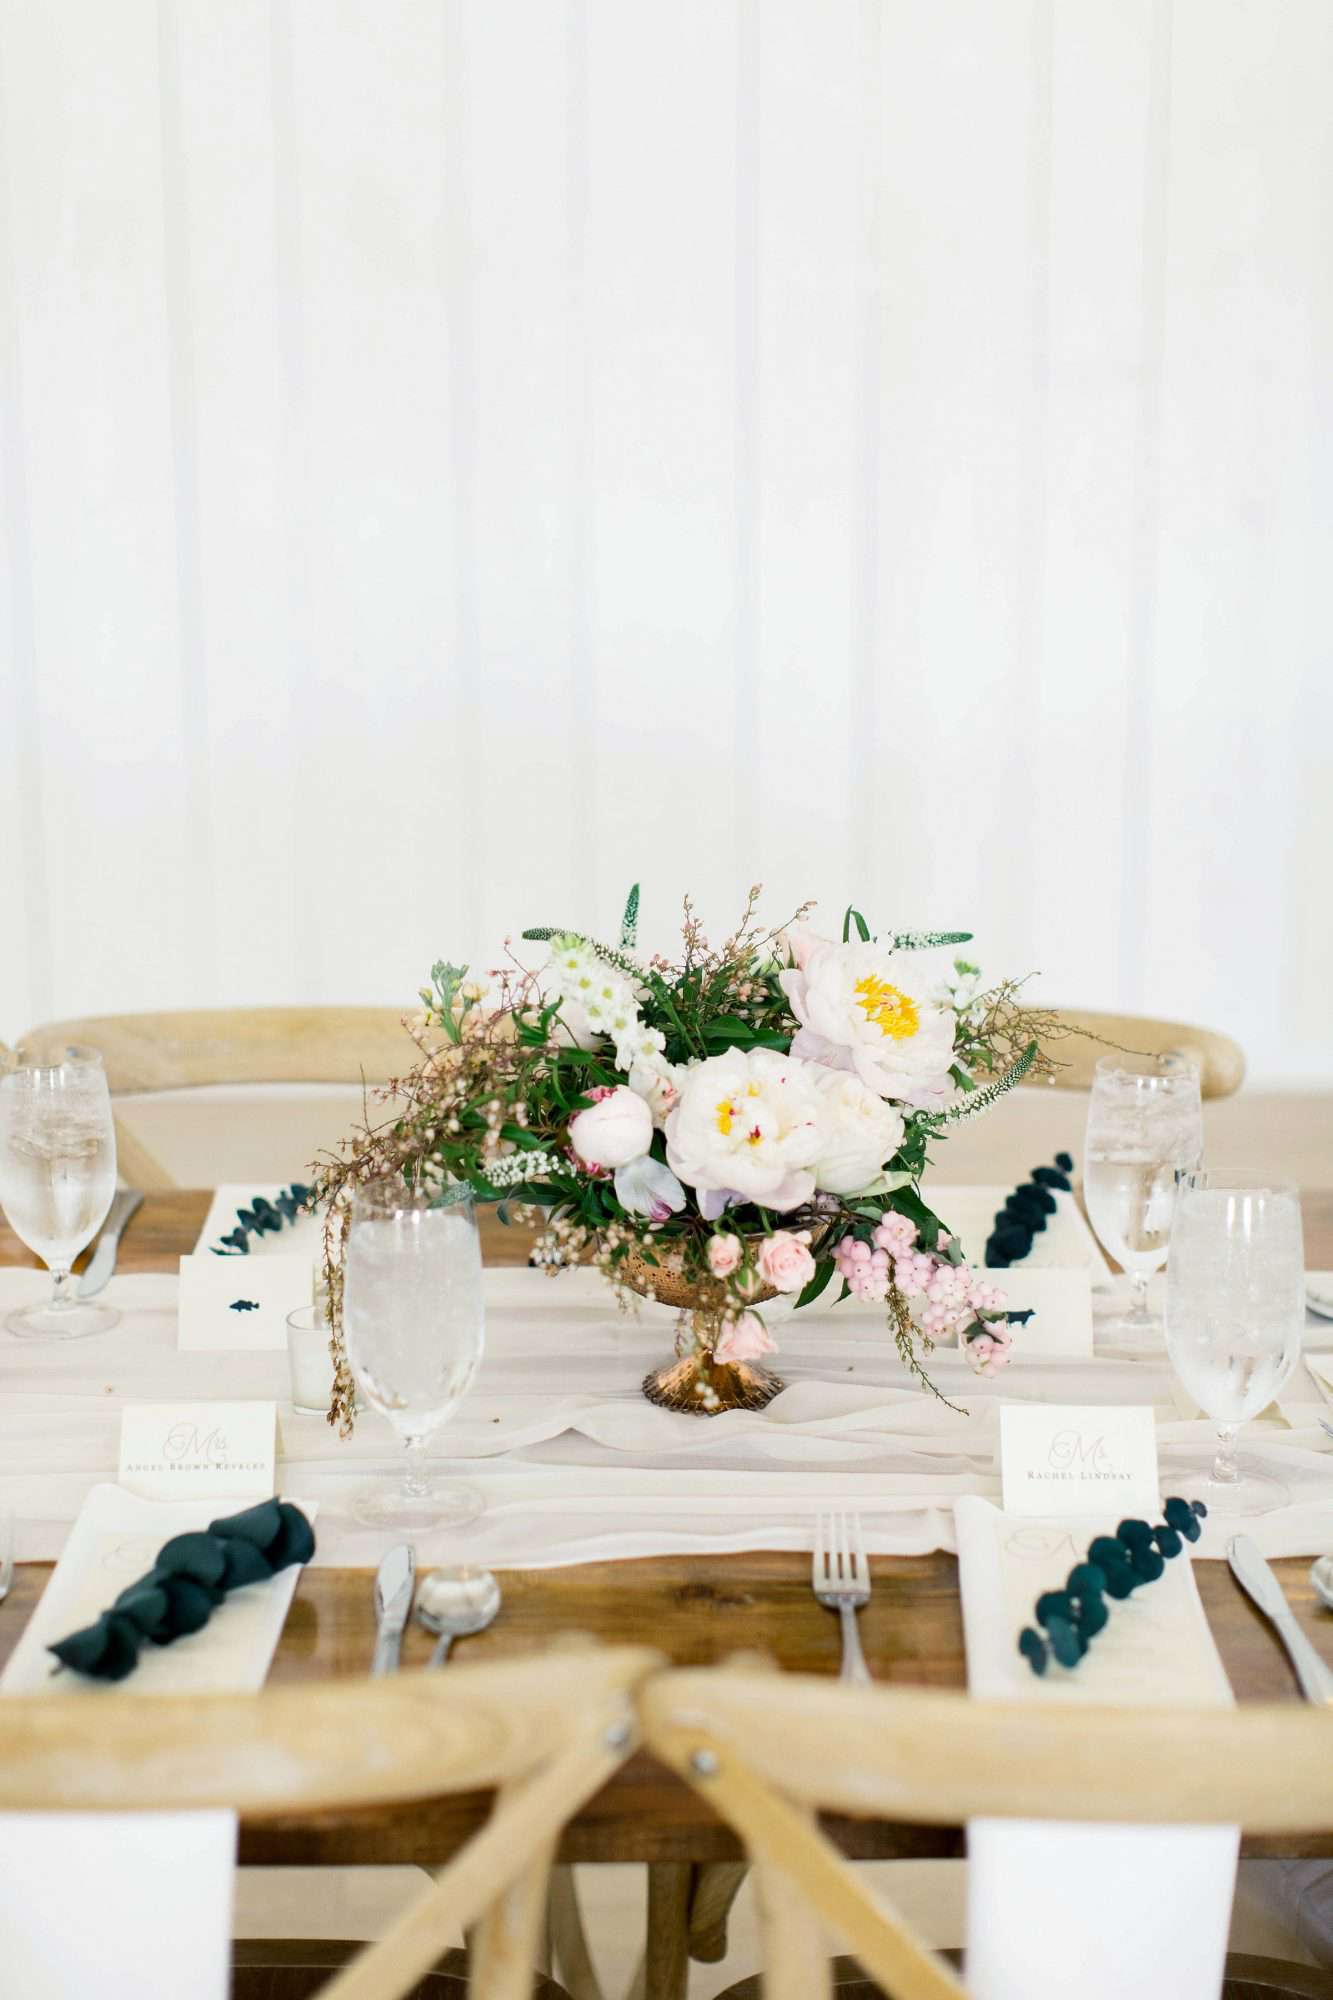 wedding reception table setting with floral centerpiece